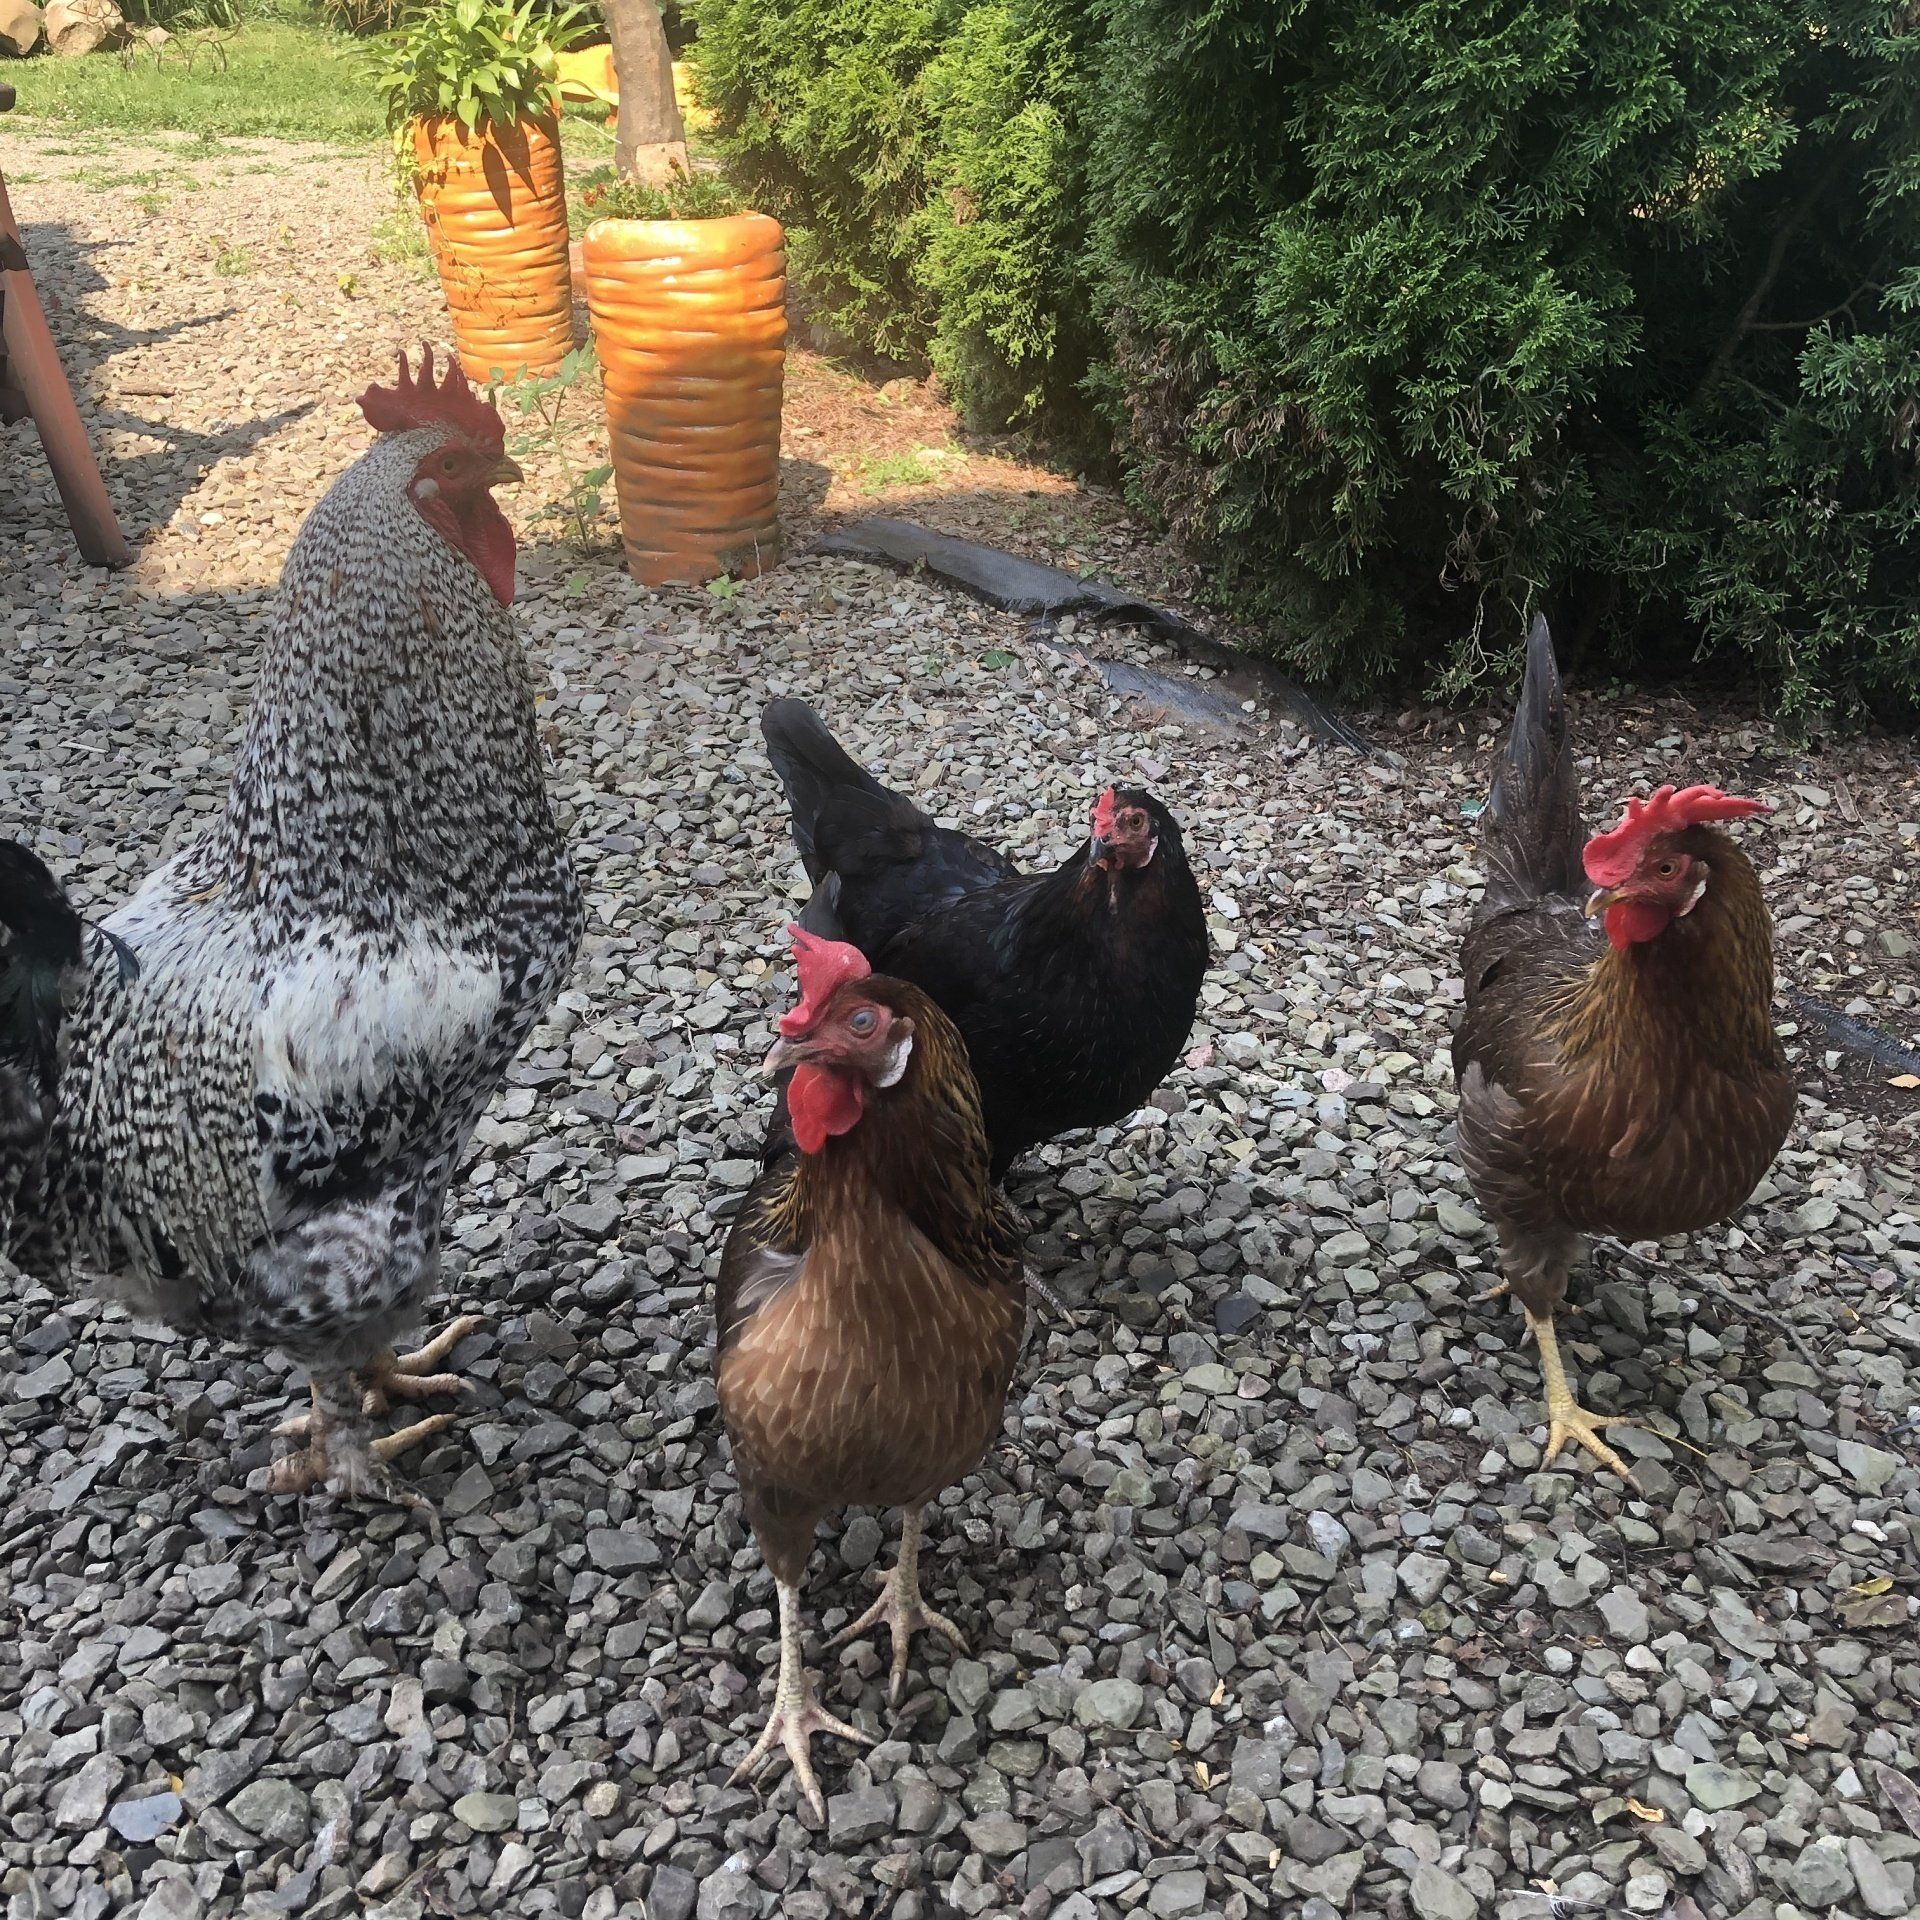 Chickens grouped together